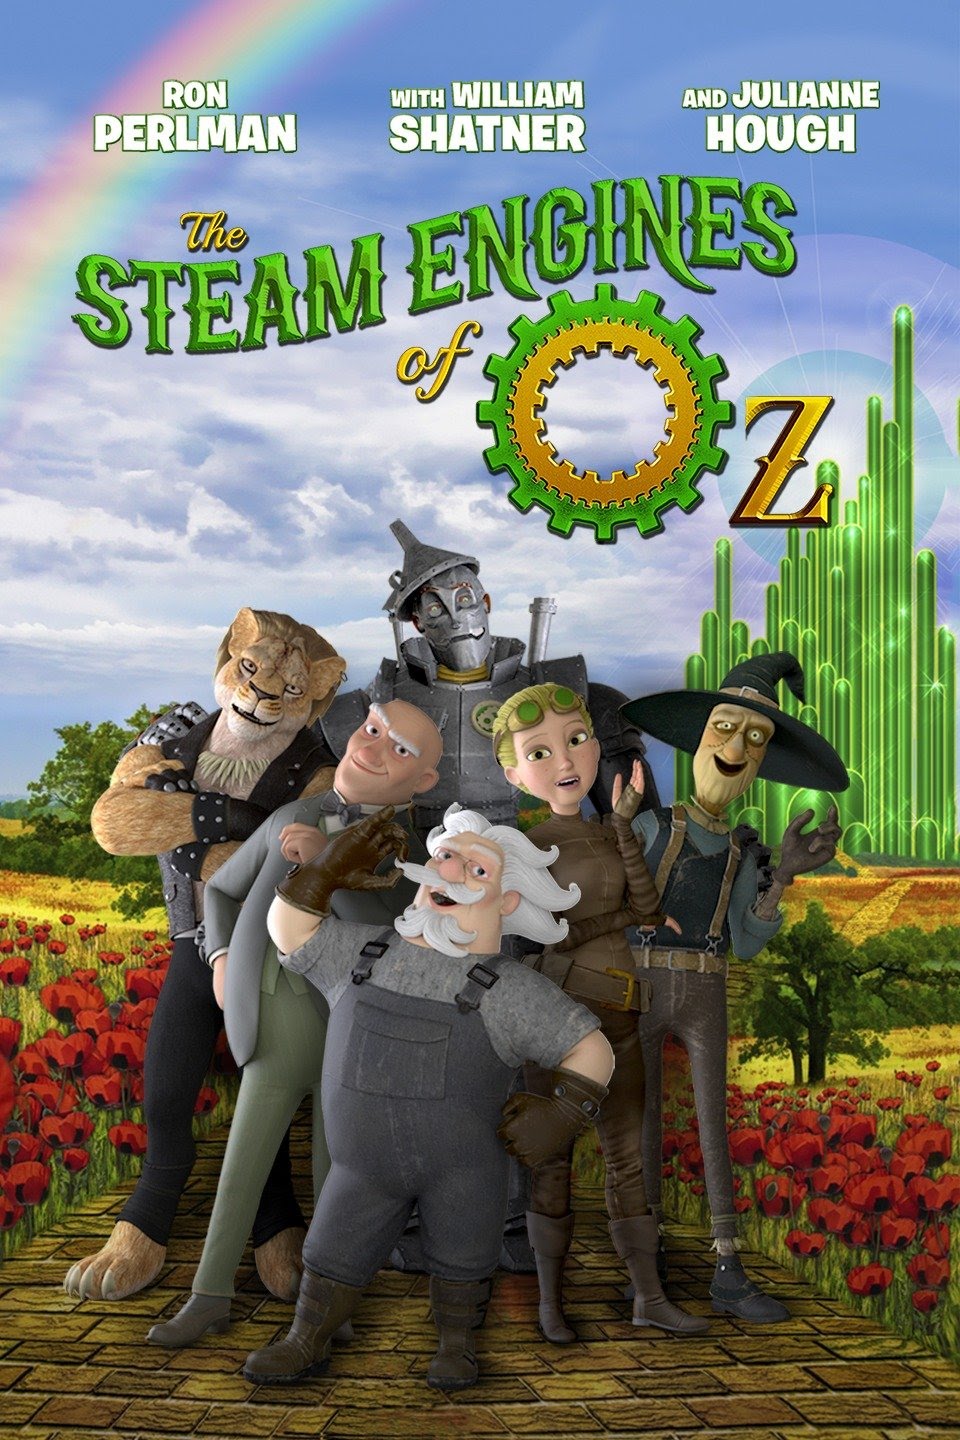 The steam engines of oz